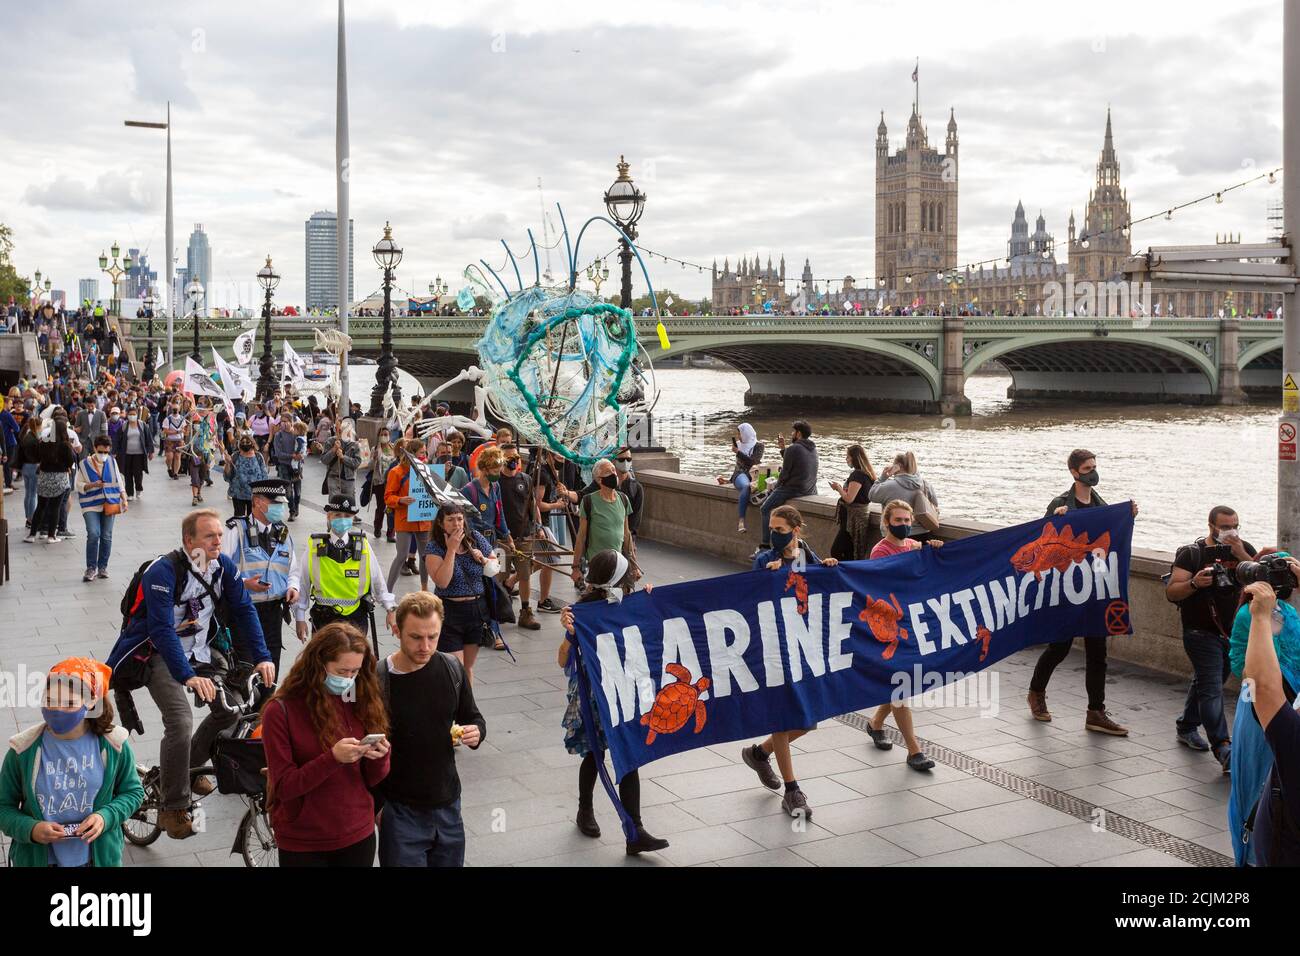 Protesters with banner during 'Marine Extinction March', Extinction Rebellion demonstration, South Bank, London, 6 September 2020 Stock Photo